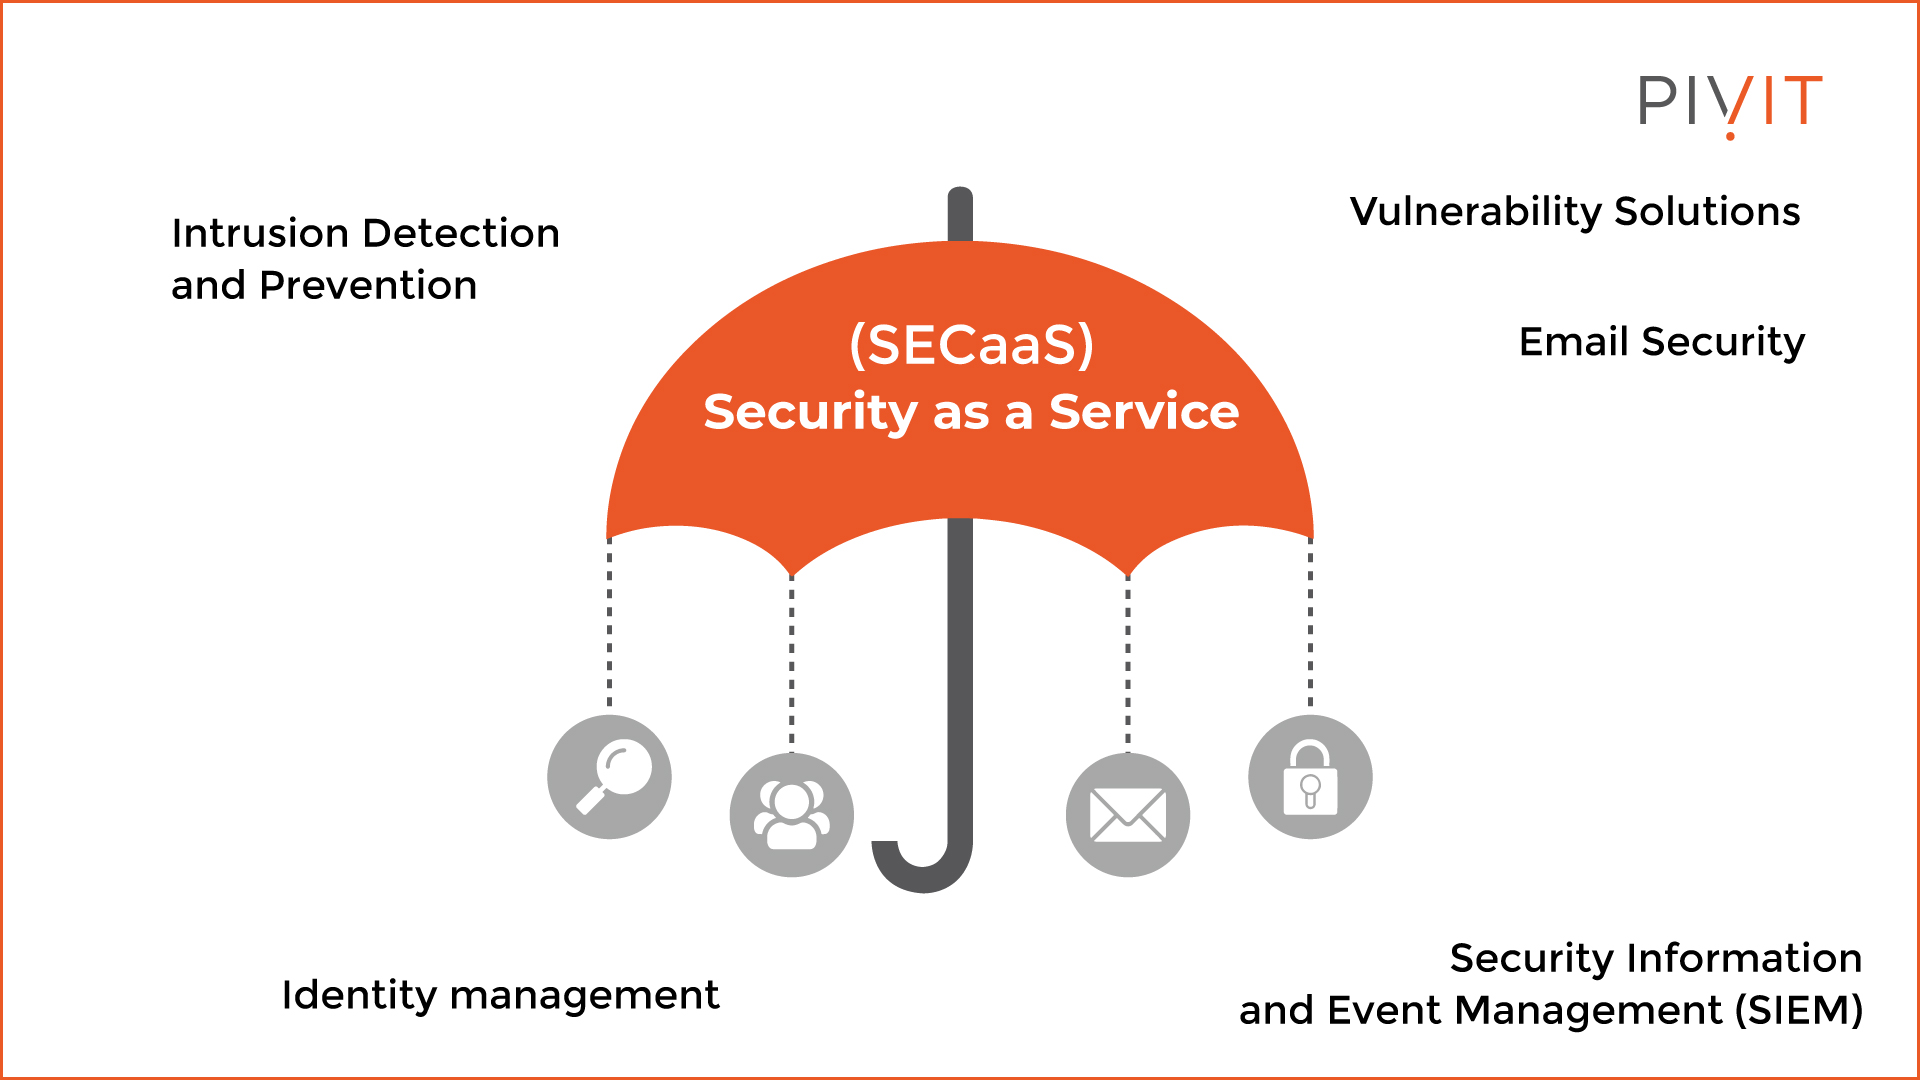 SECaaS services including intrusion detection and prevention, identity management, vulnerability solutions, email security, and security information and event management (SIEM)